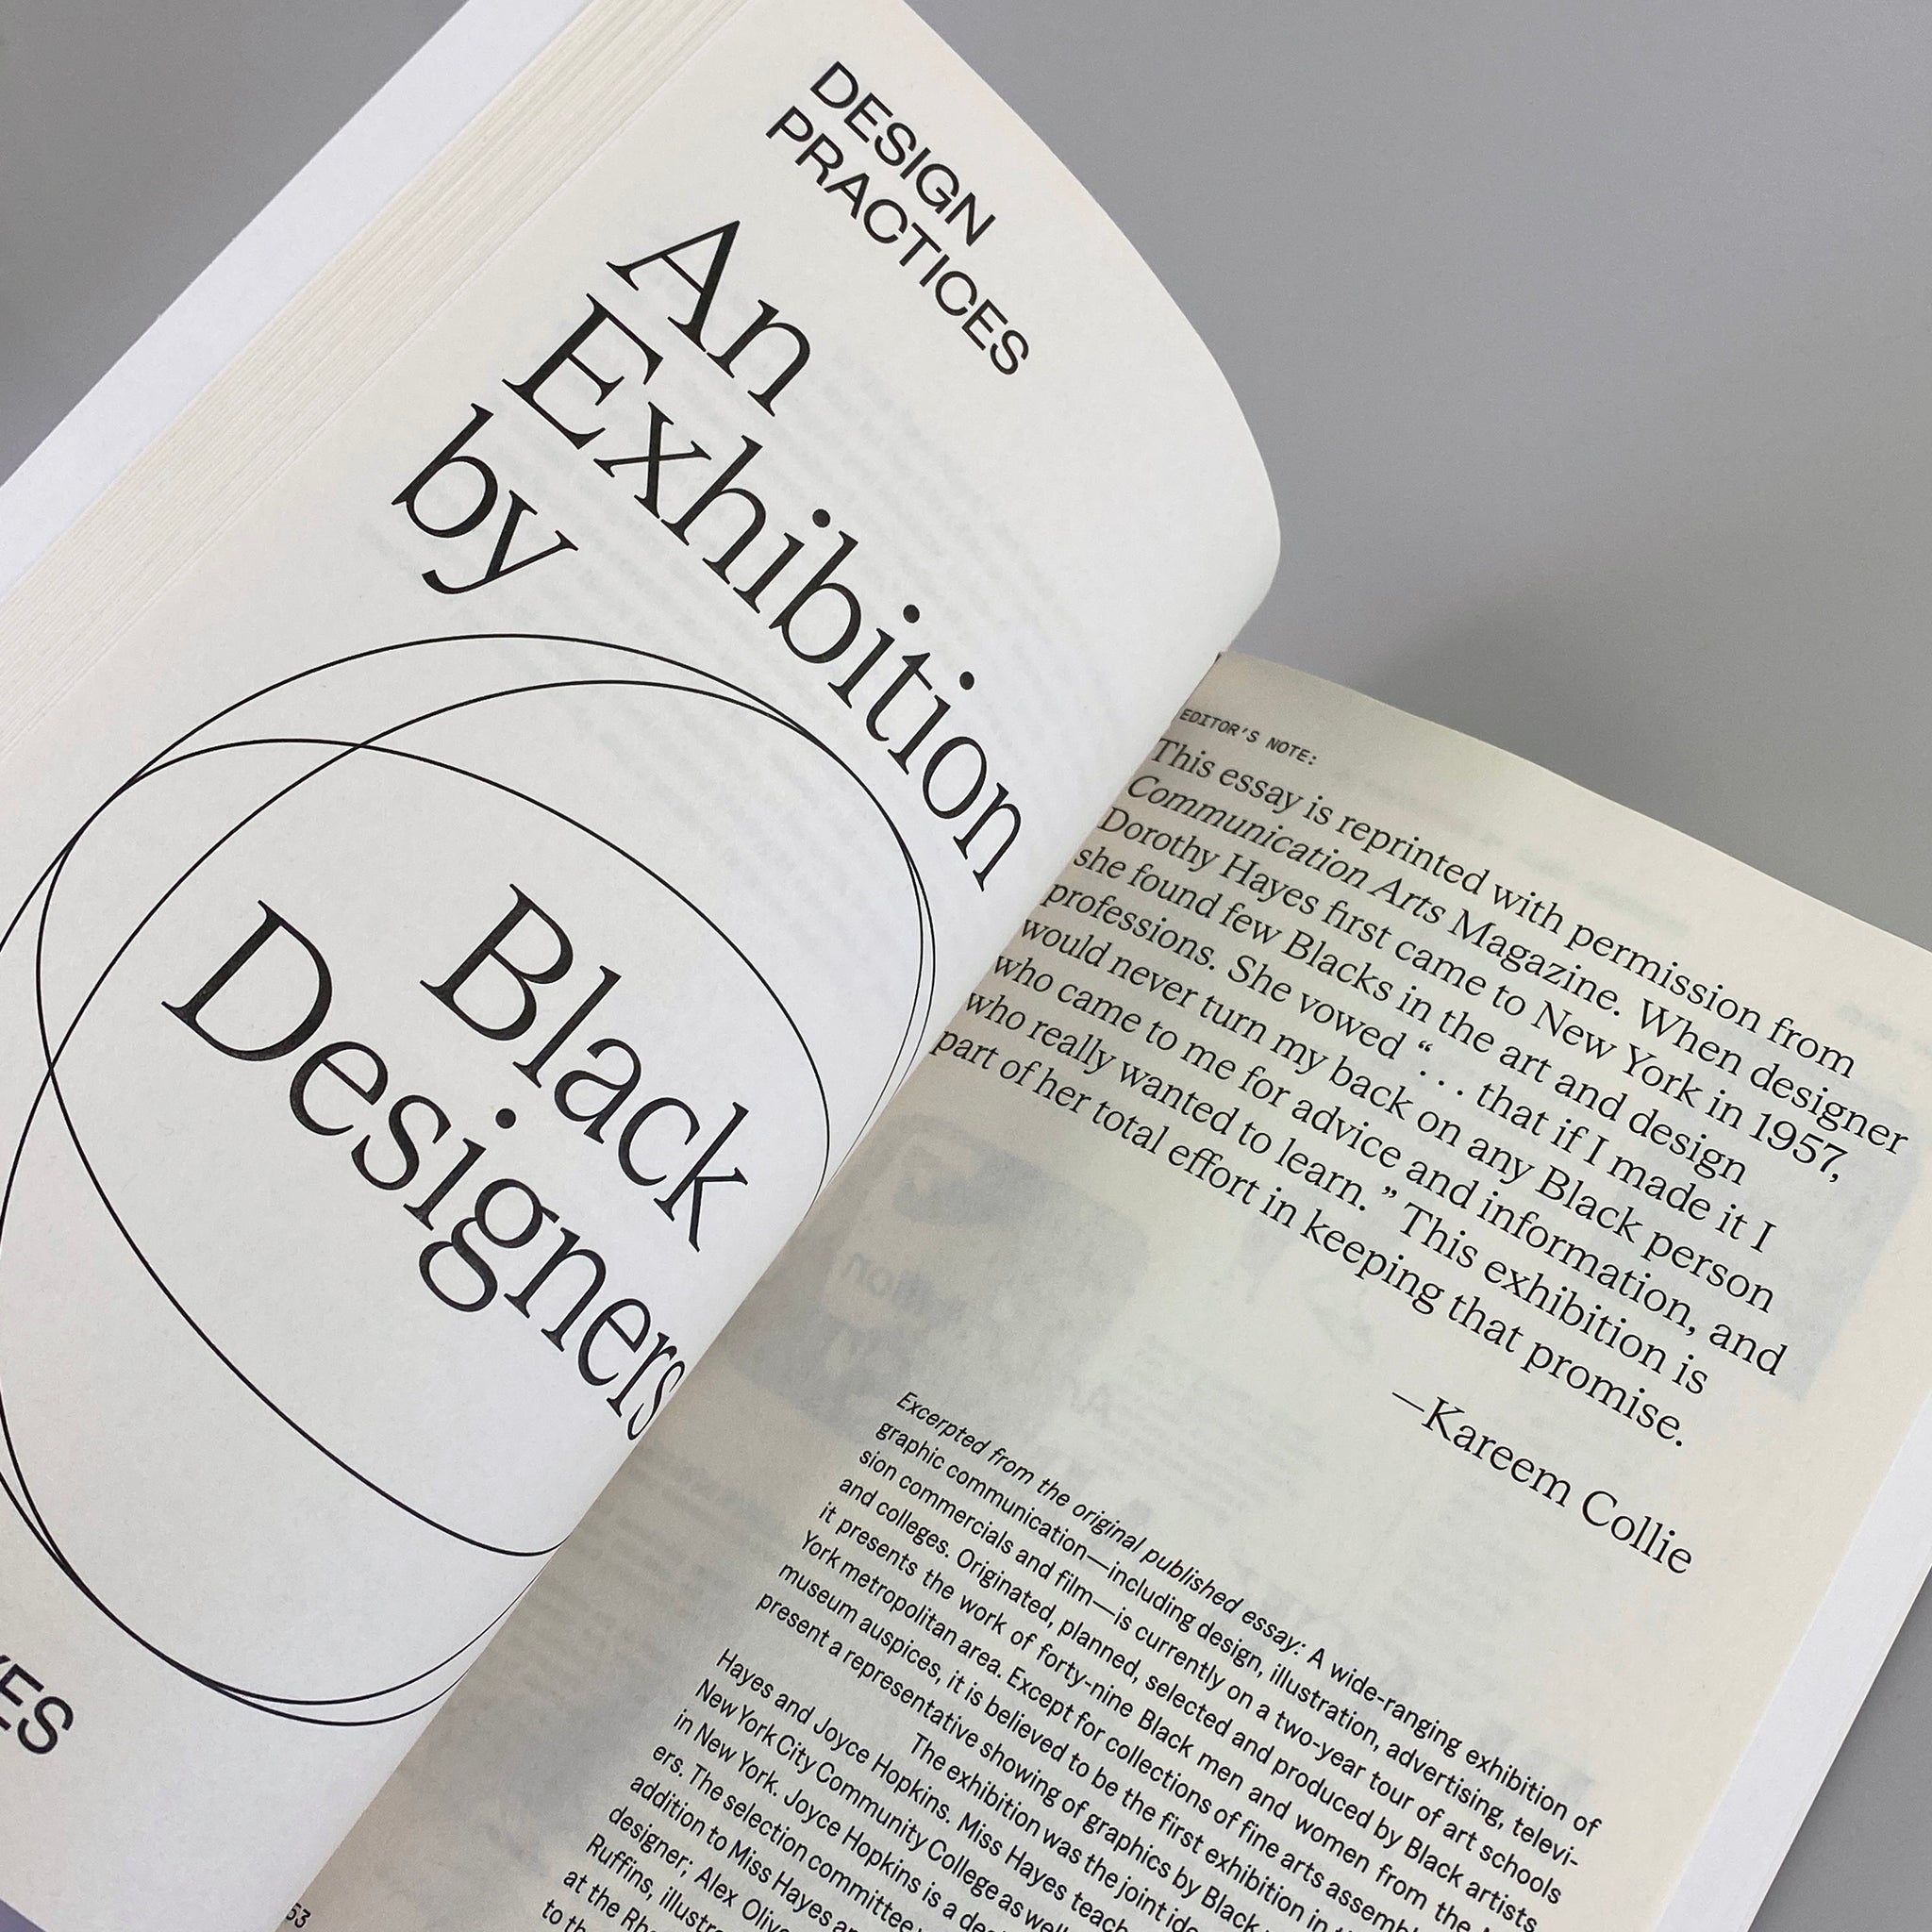 The Black Experience in Design: Identity, Expression, & Reflection